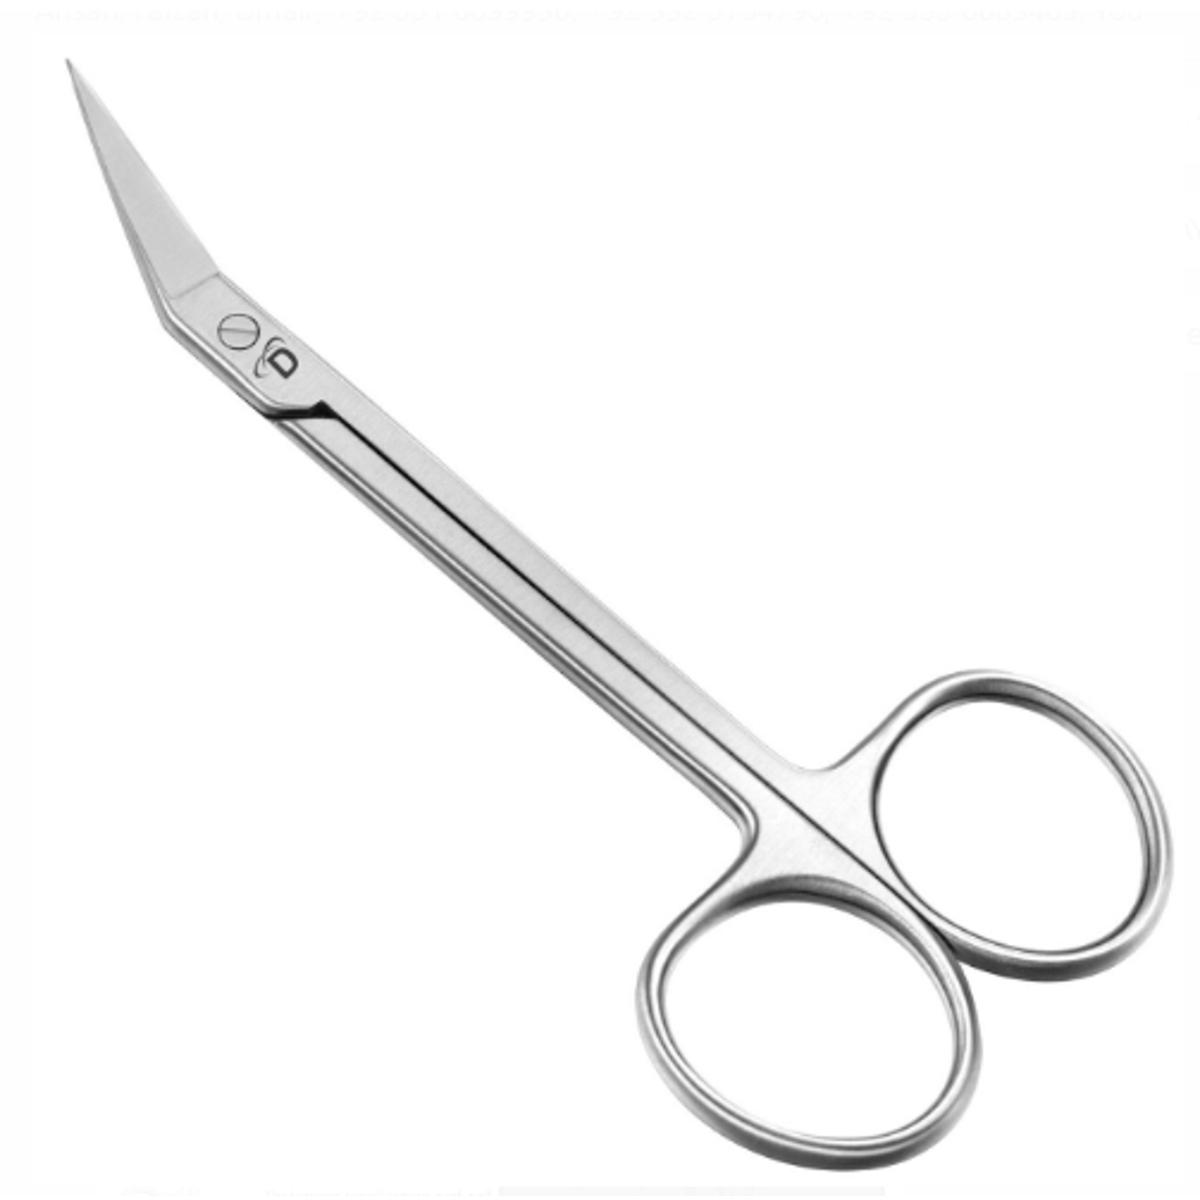 Extra Long Handled Angled Toe Nail Chiropody Podiatry - Steel Clippers 